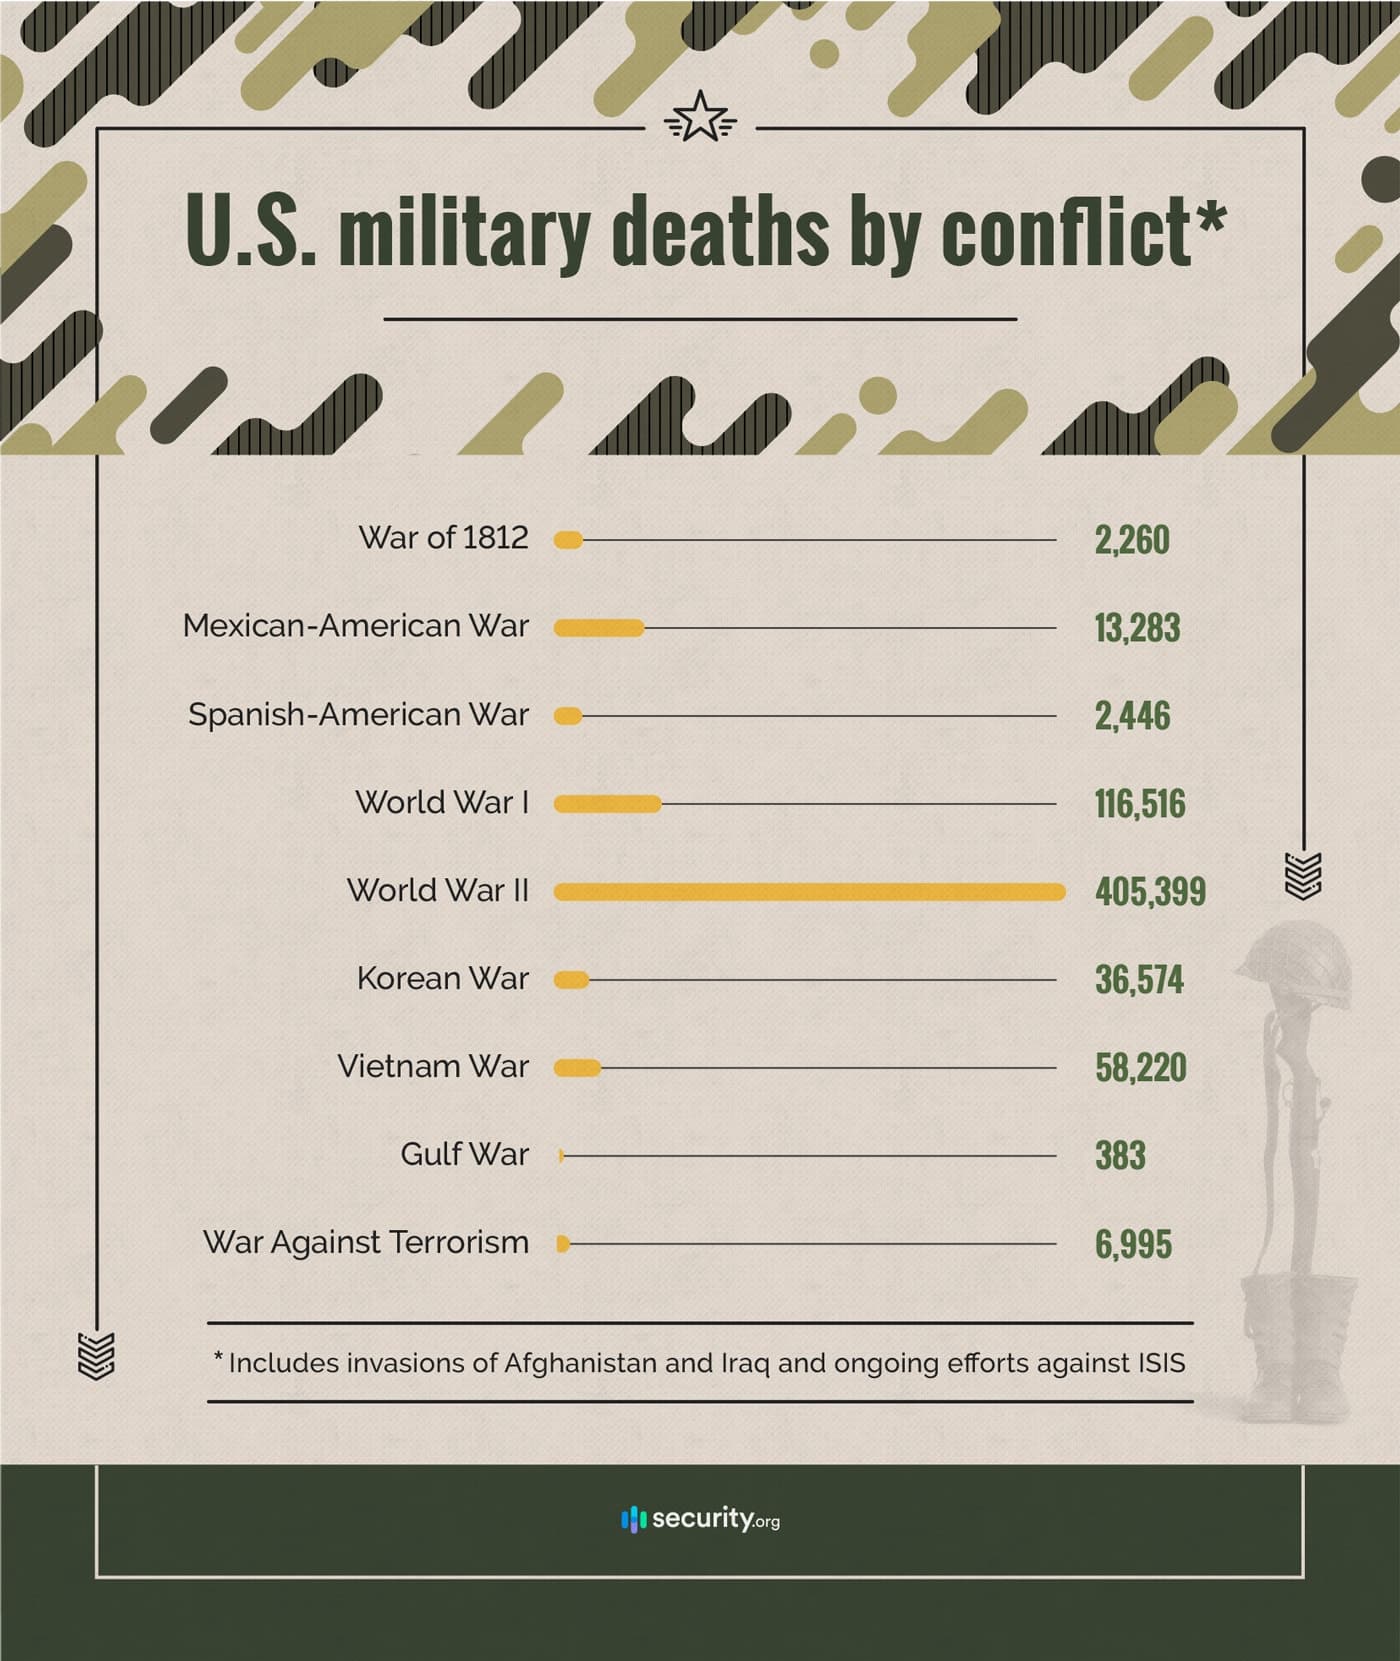 U.S. military deaths by conflict